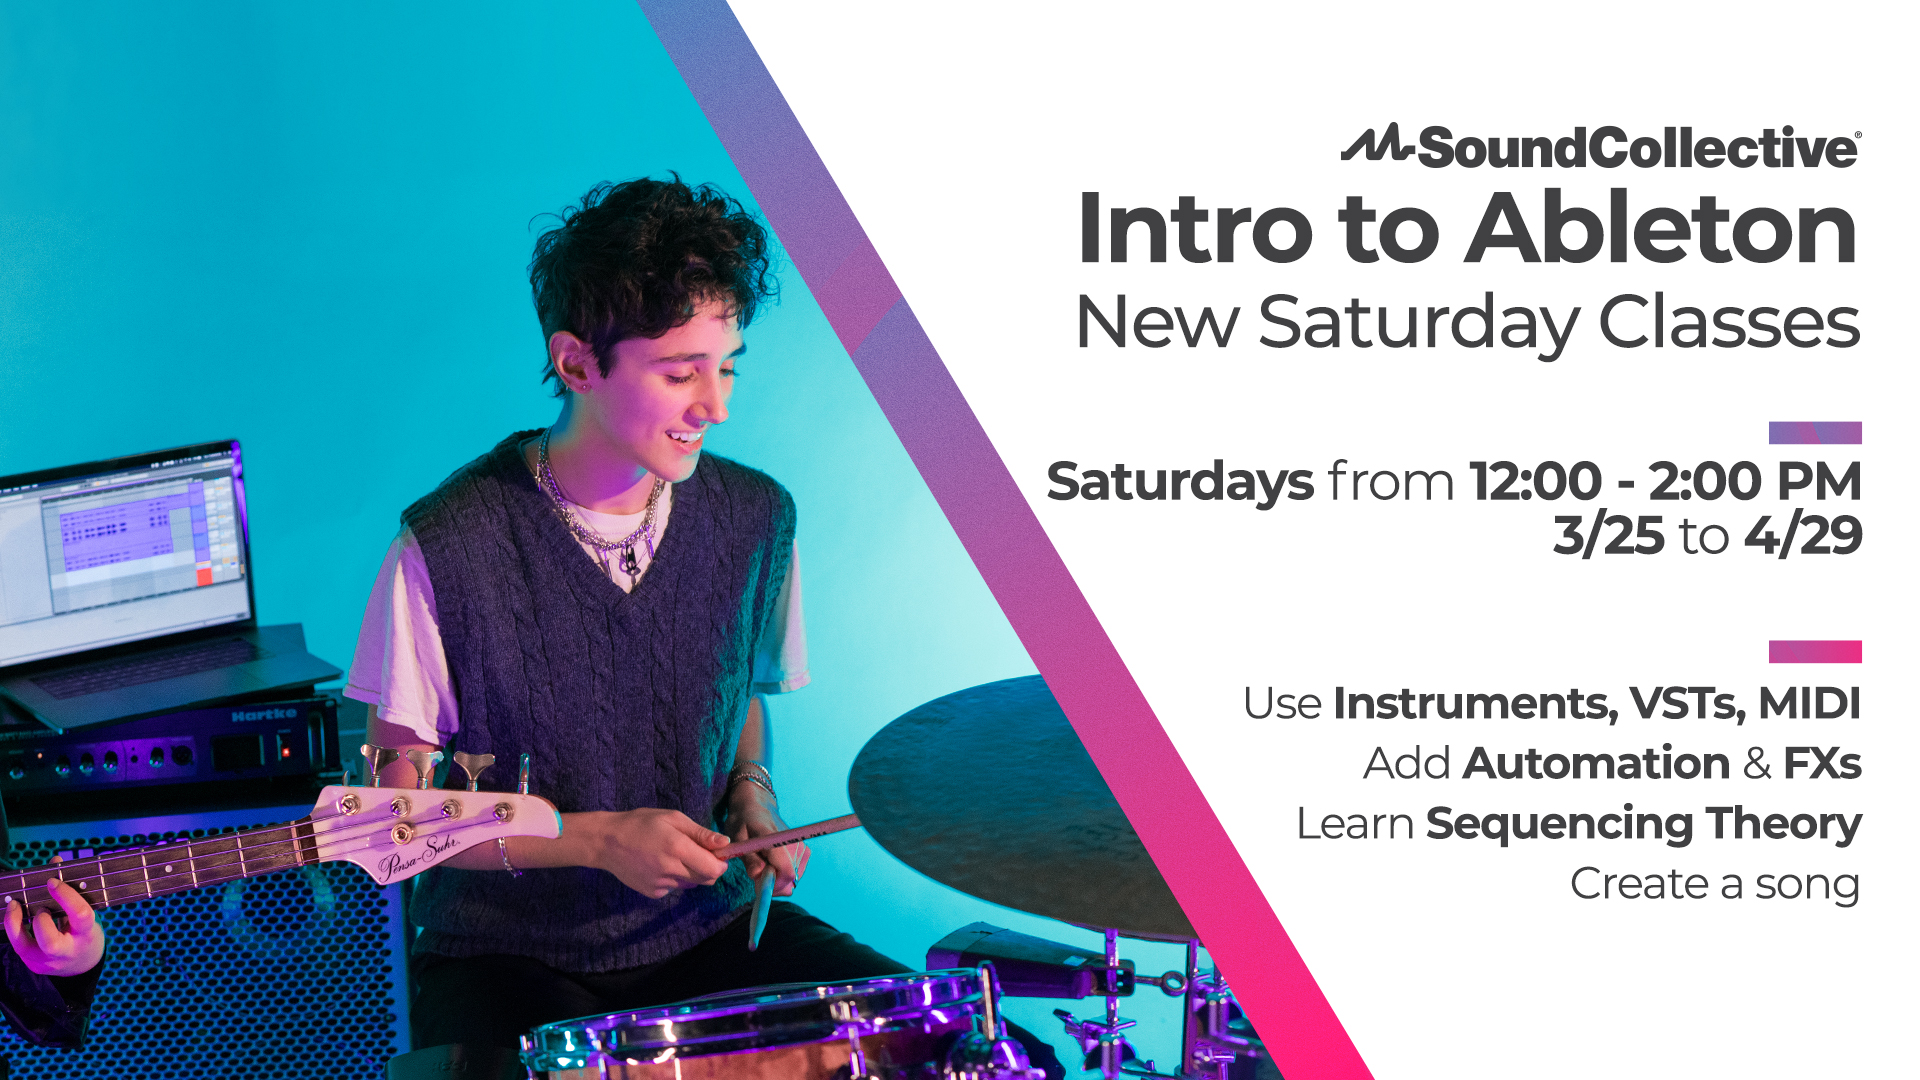 Intro to Ableton,ableton live,Short-term Programs,SoundCollective, Intro to Ableton, SoundCollective